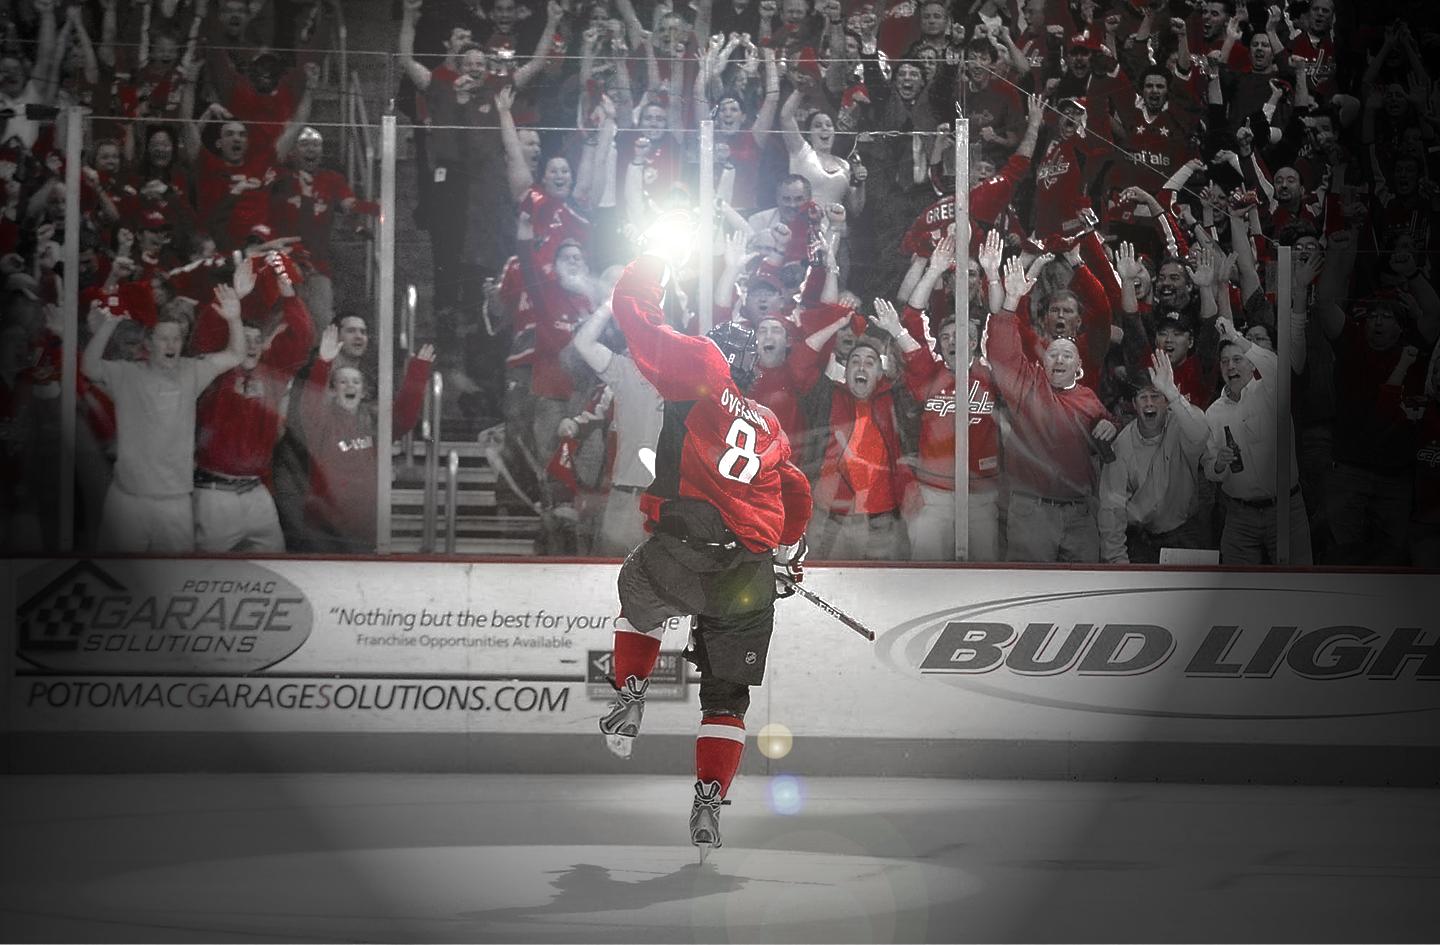 Download Alex Ovechkin 2018 Stanley Cup Wallpaper